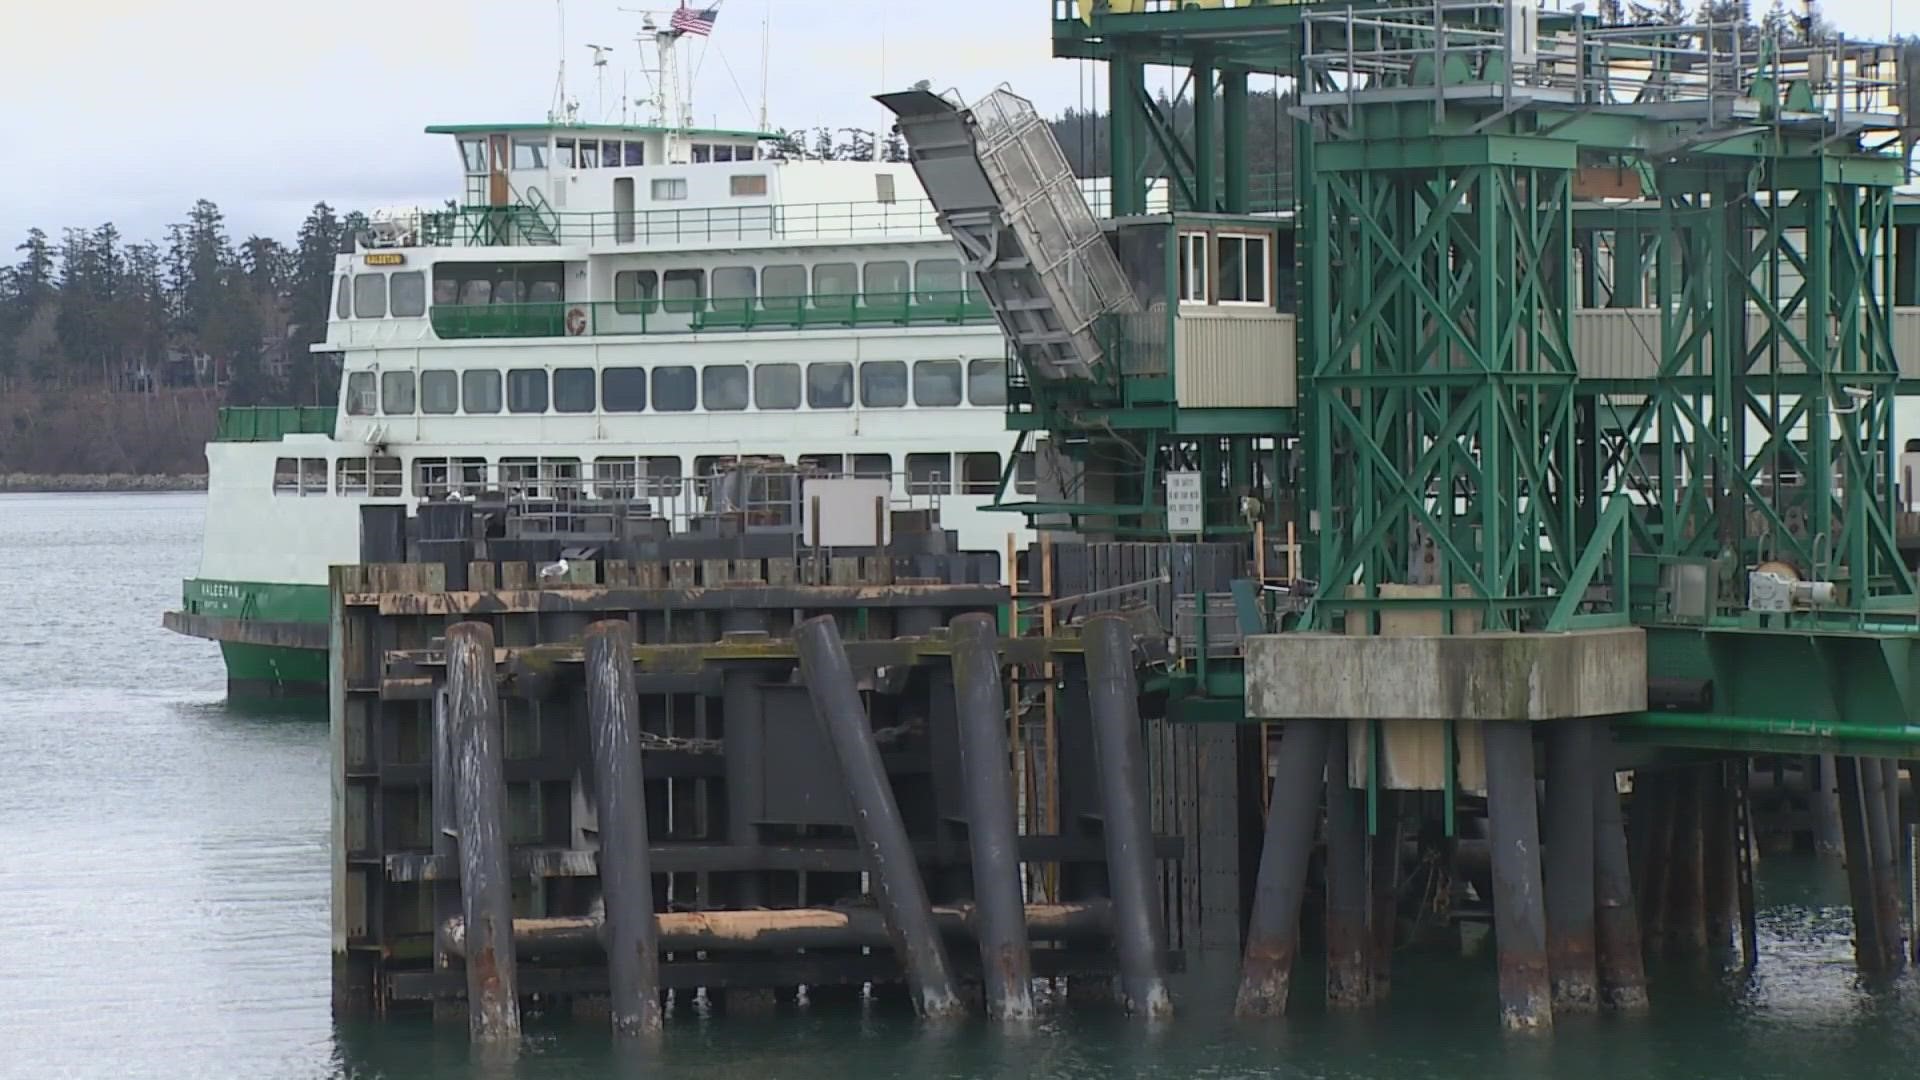 The state ferry system says it's due to an ongoing worker and boat shortage.